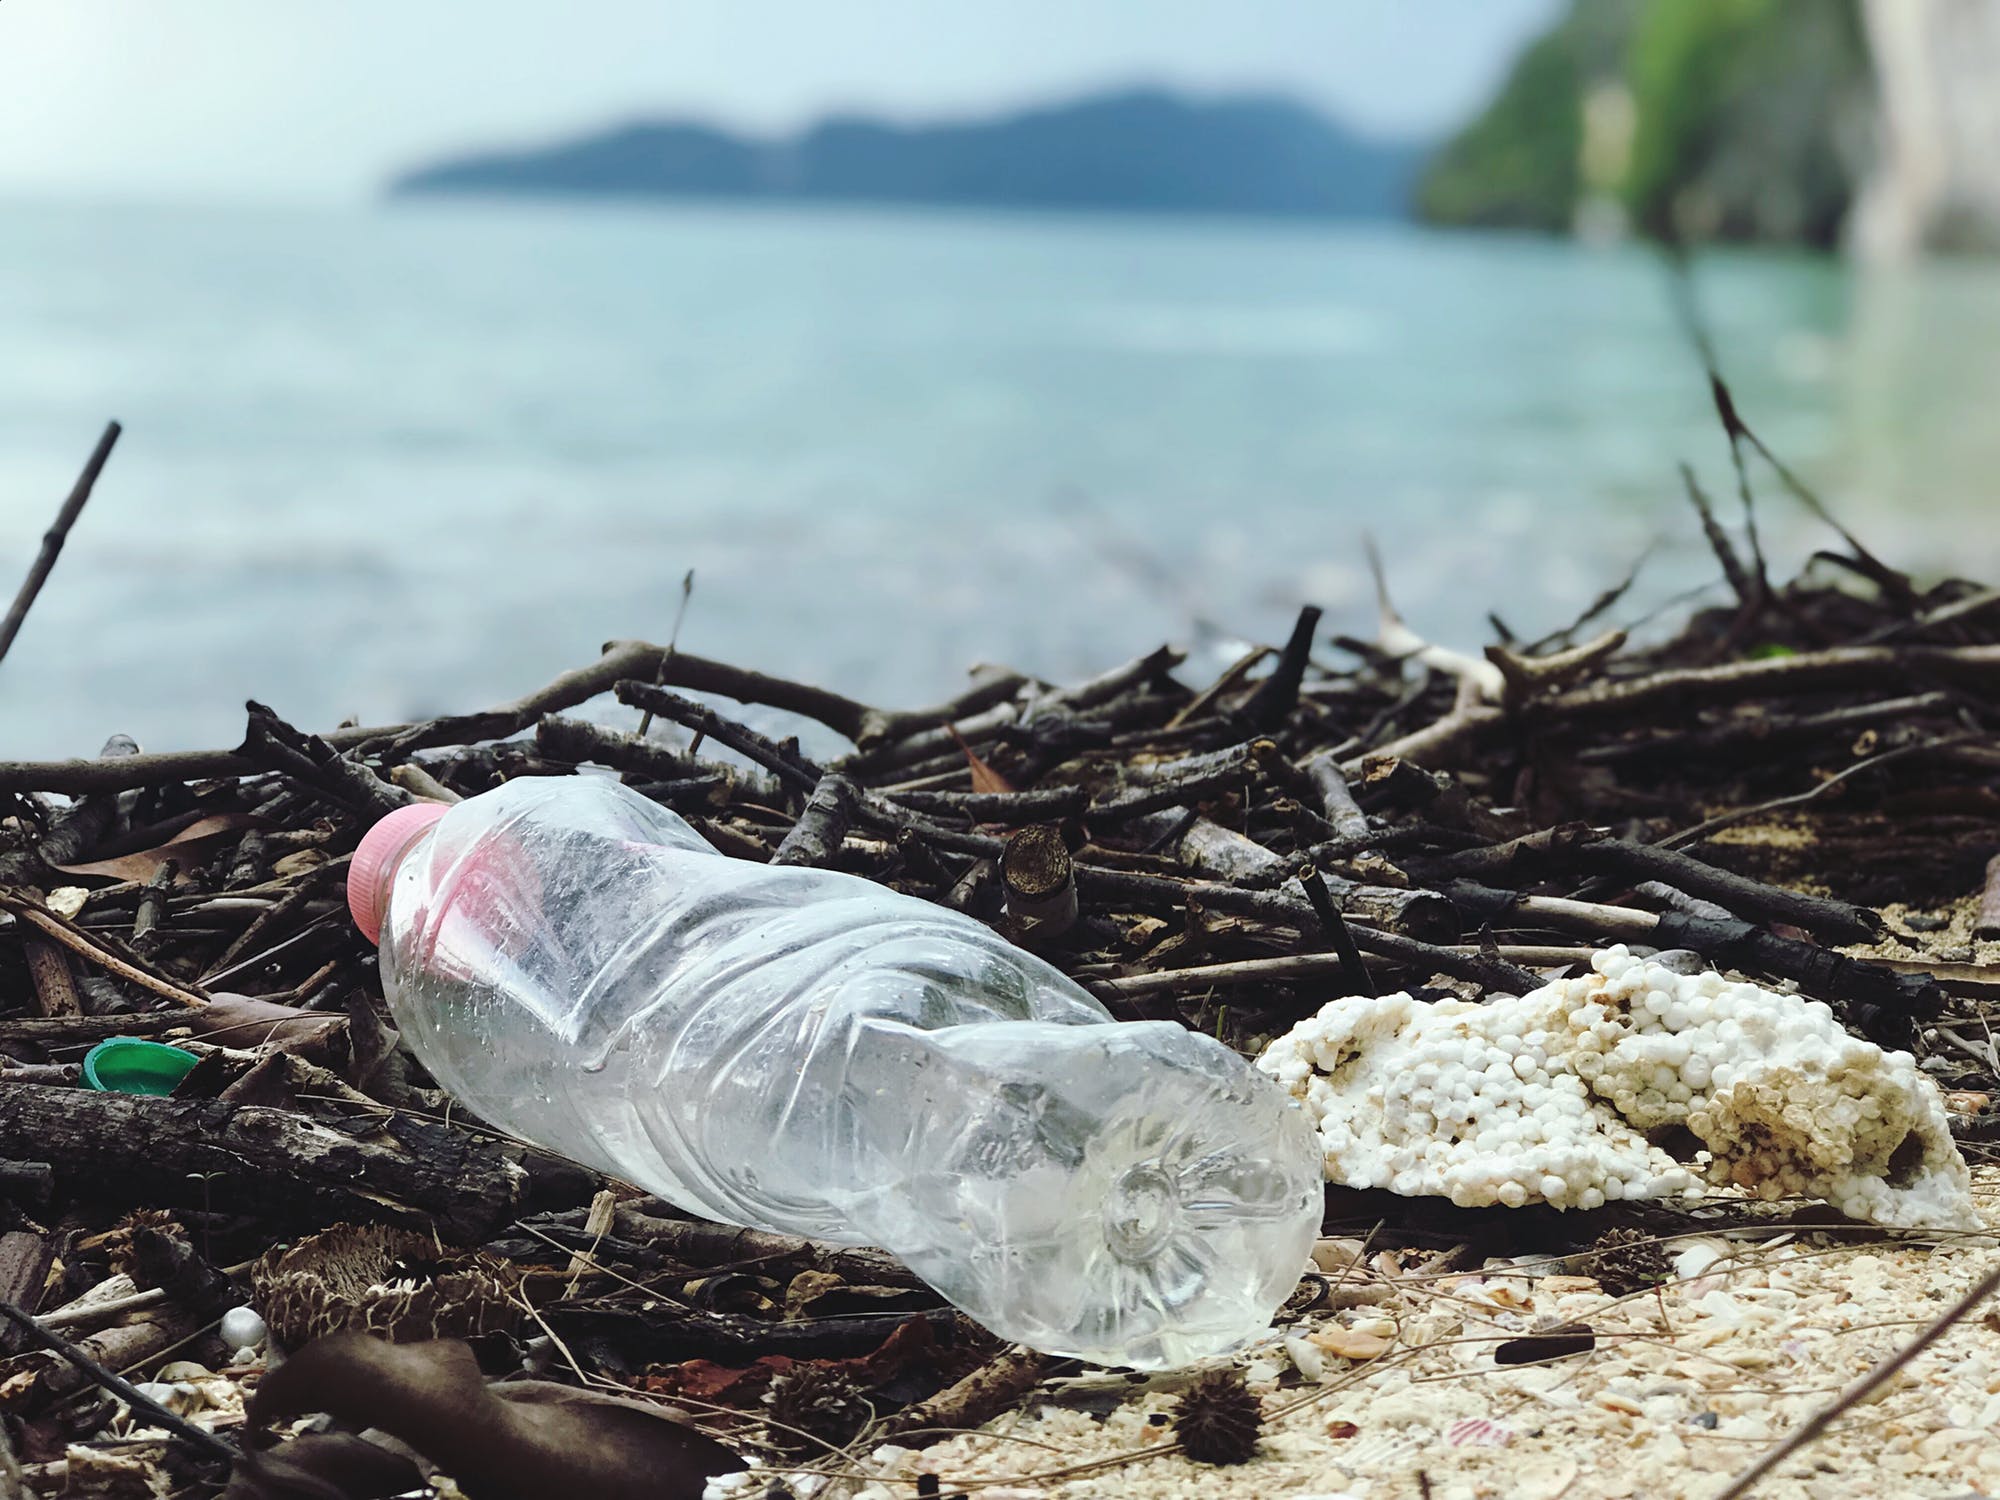 New Filter Device to Keep Plastic Out of Our Oceans